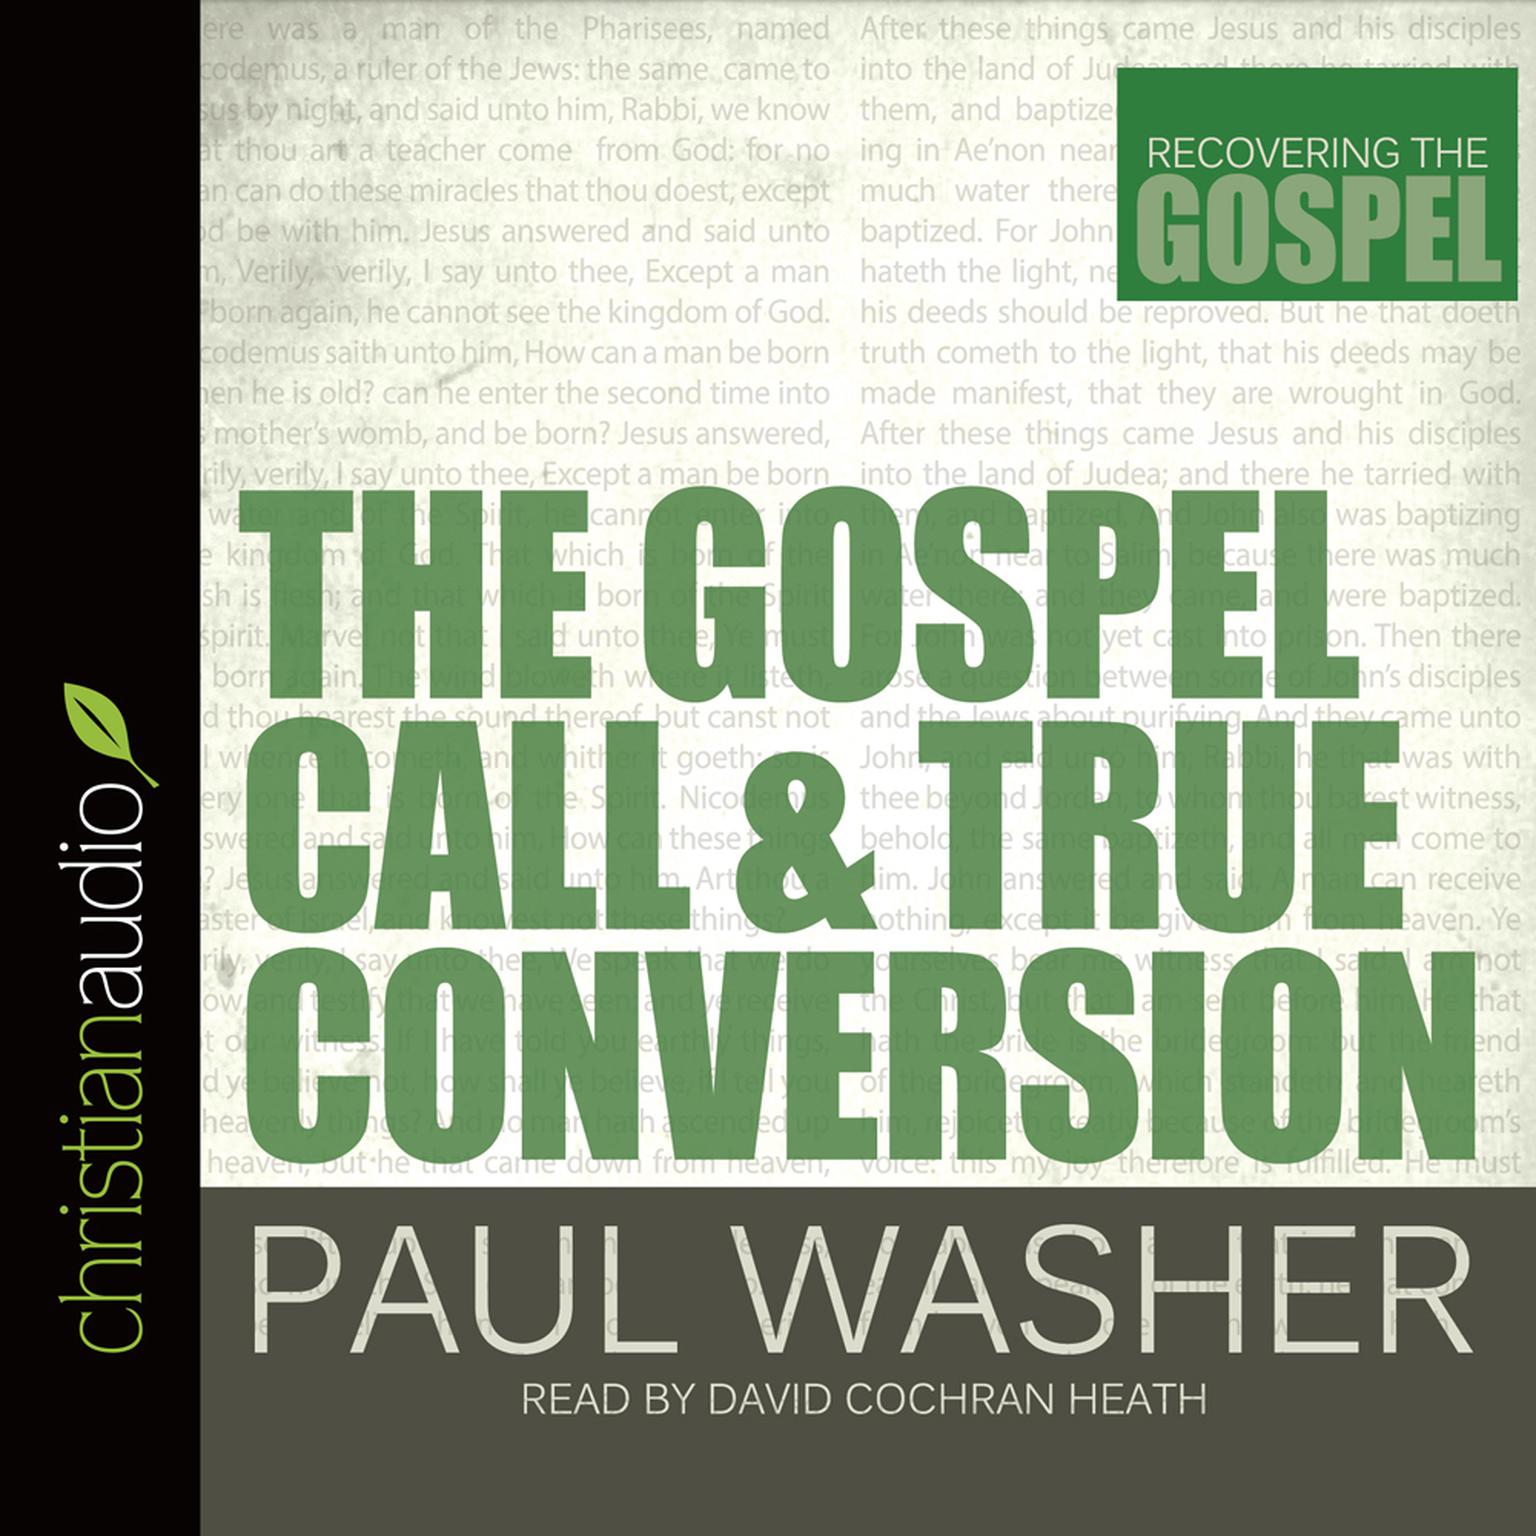 Gospel Call and True Conversion Audiobook, by Paul Washer